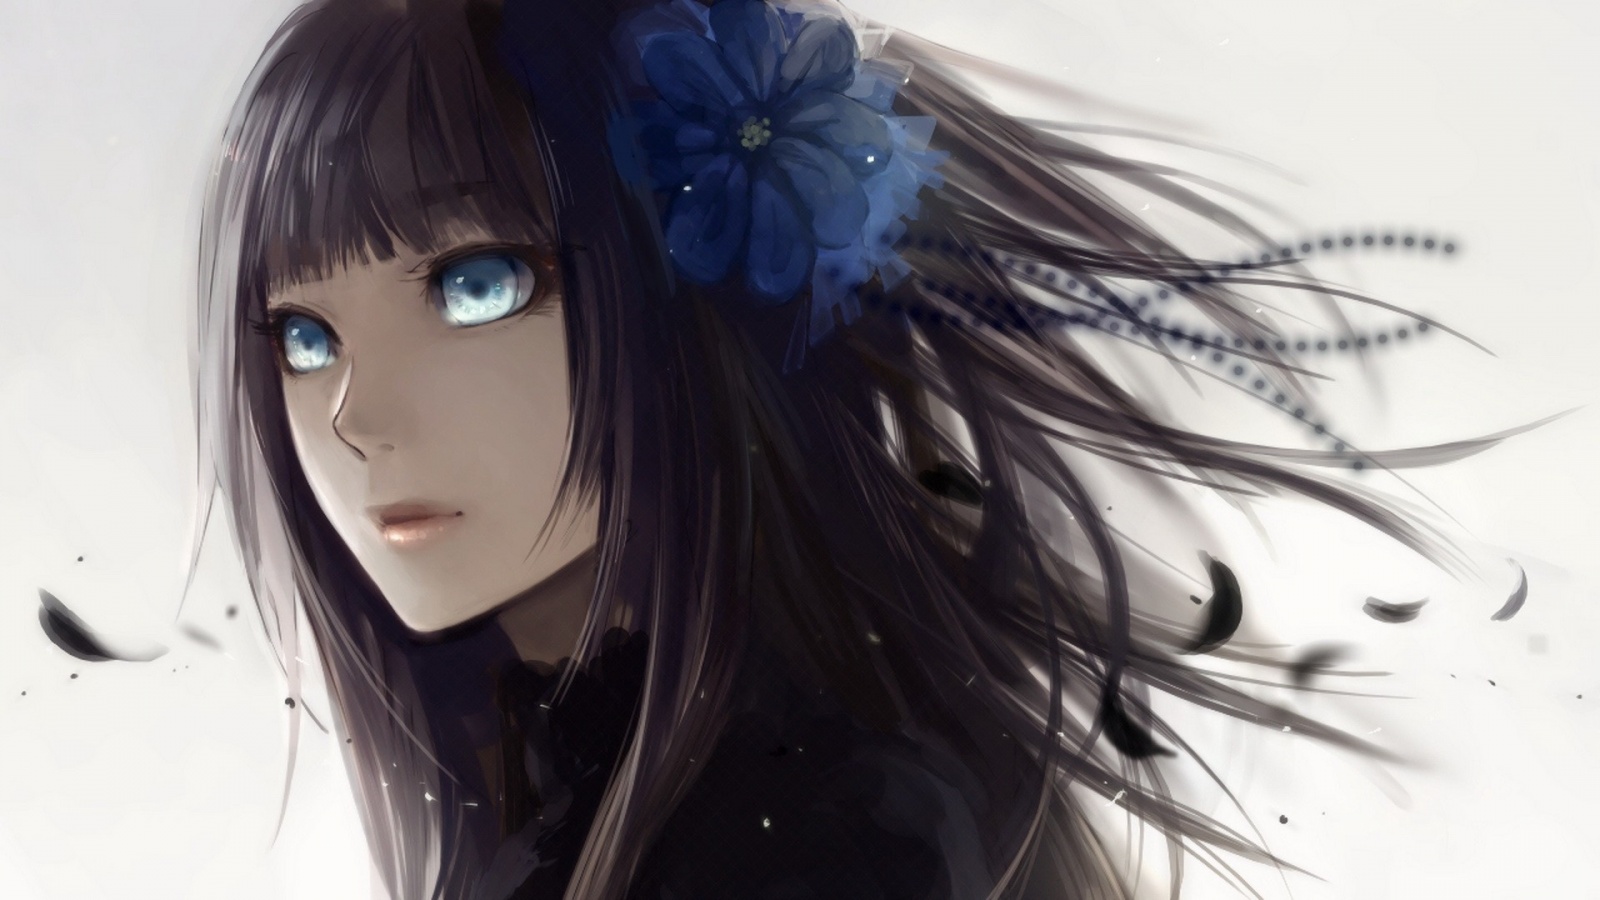 http://www.bhmpics.com/wallpapers/anime_girl_with_black_hair_and_blue_eyes-1600x900.jpg